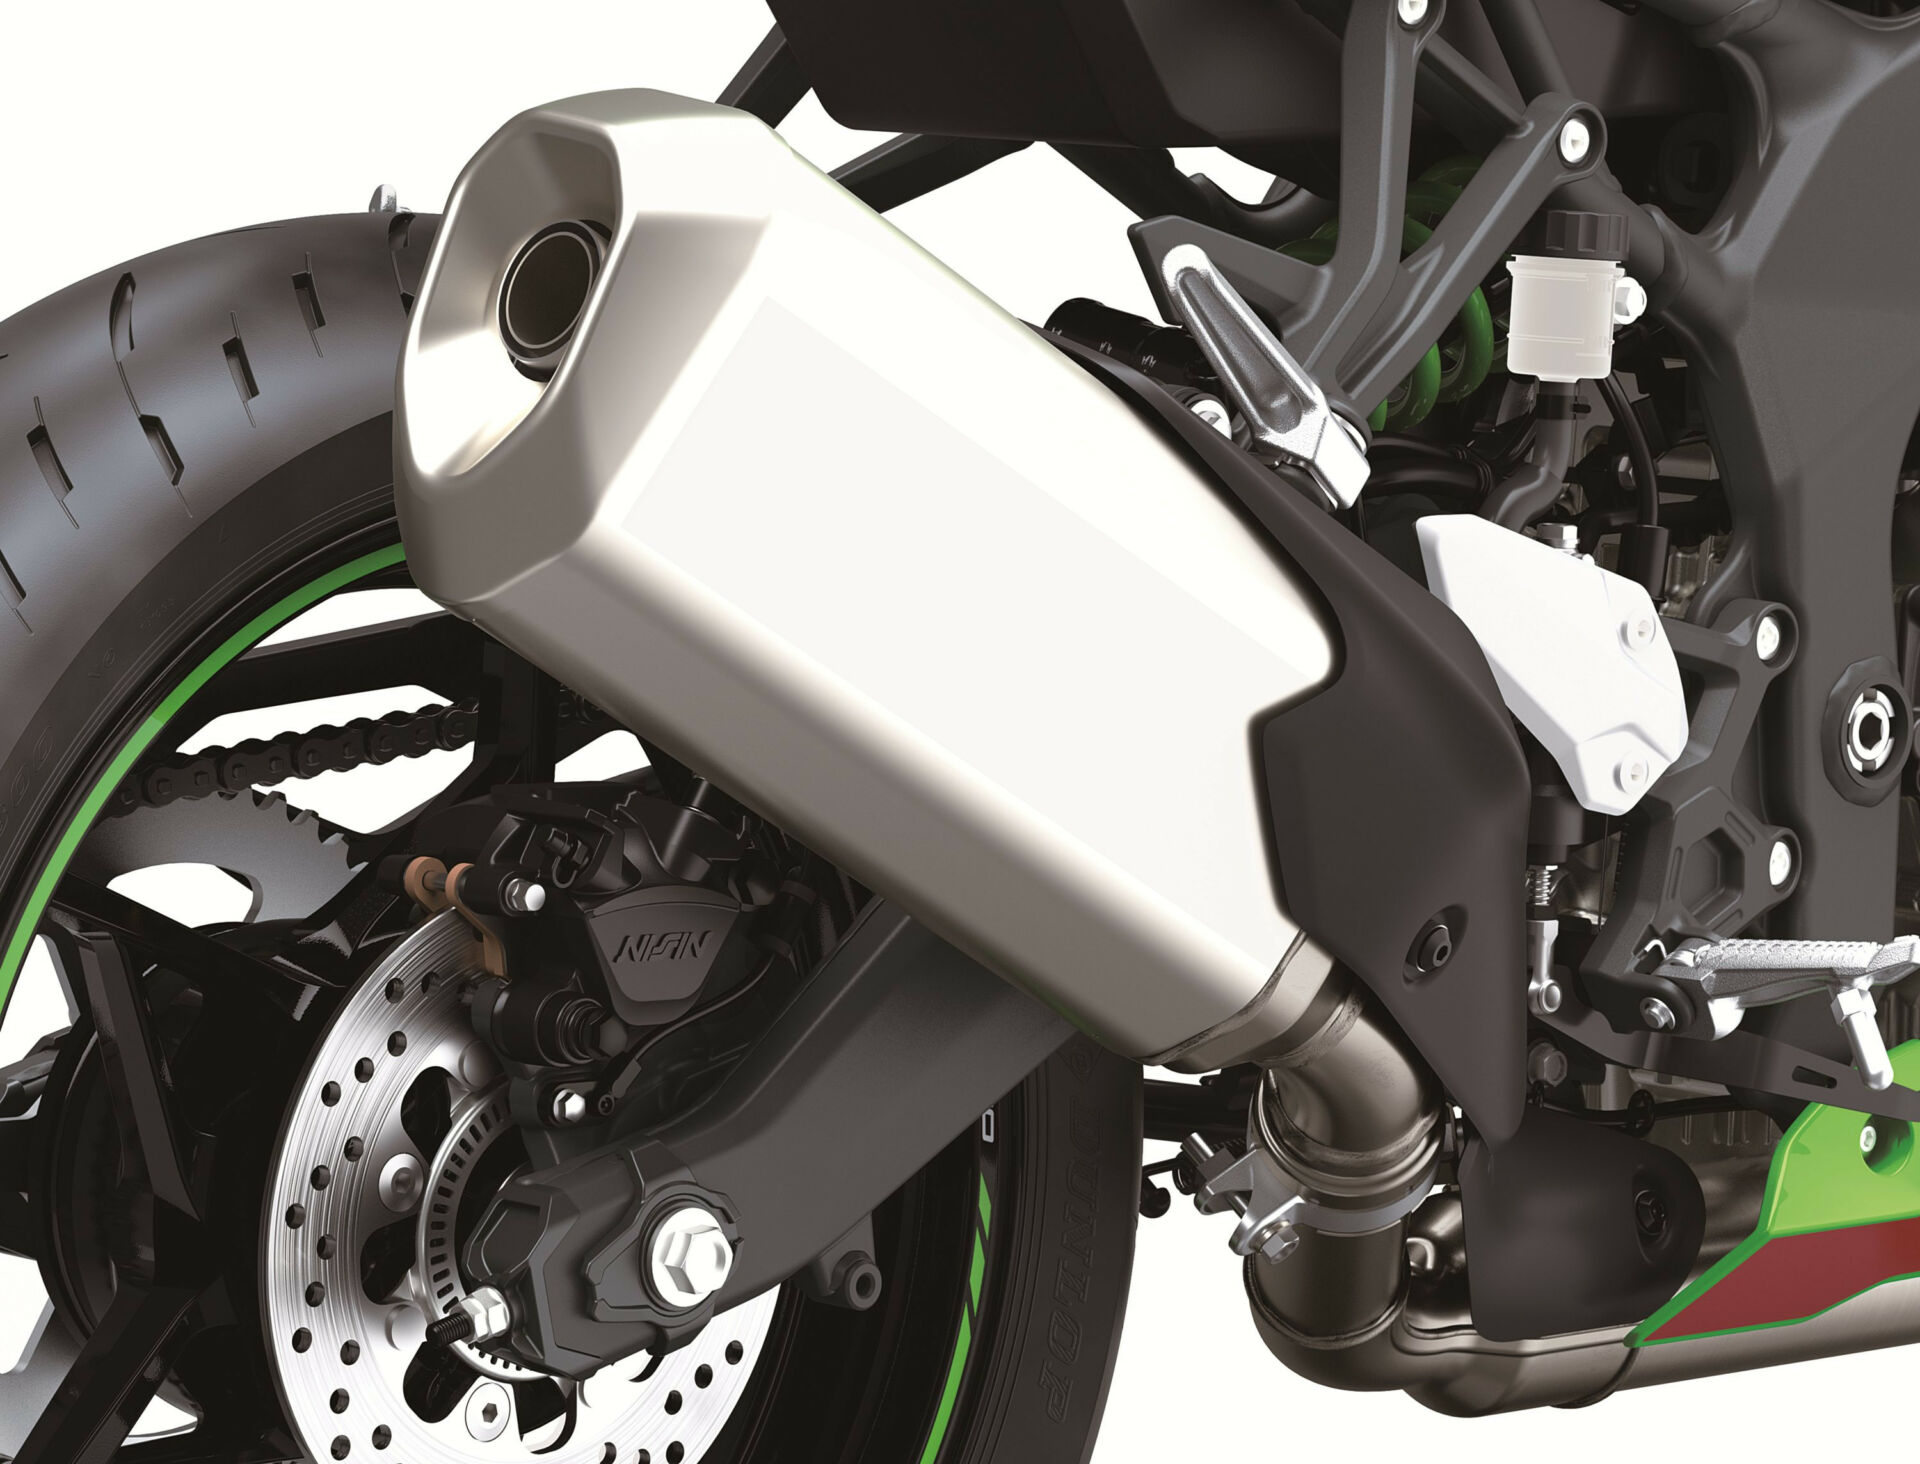 Kawasaki designed the exhaust system on the Ninja ZX-4RR so it is easy to add an aftermarket exhaust silencer. Photo courtesy Kawasaki.